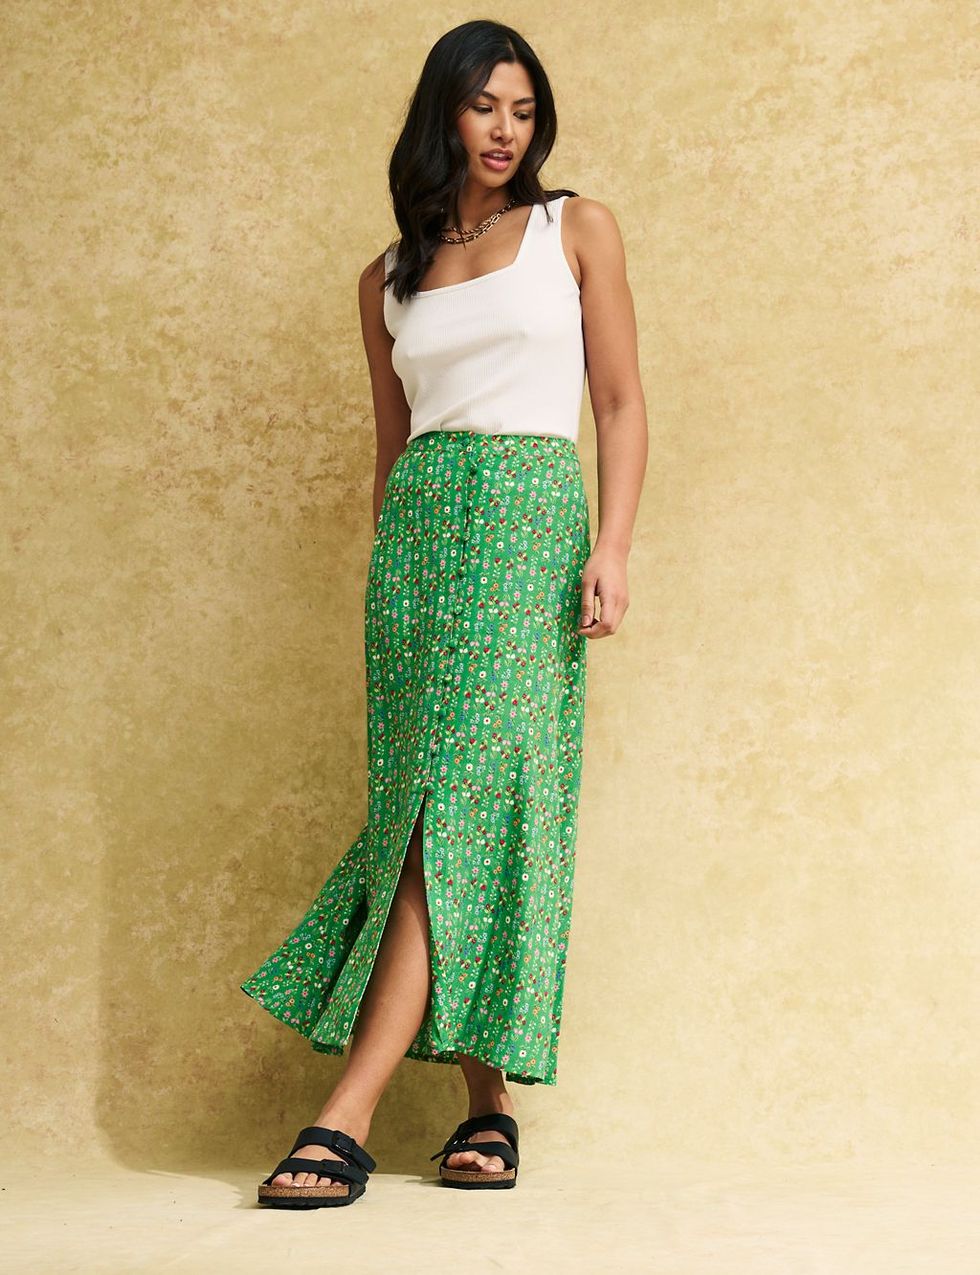 12 summer skirts you need in your wardrobe now